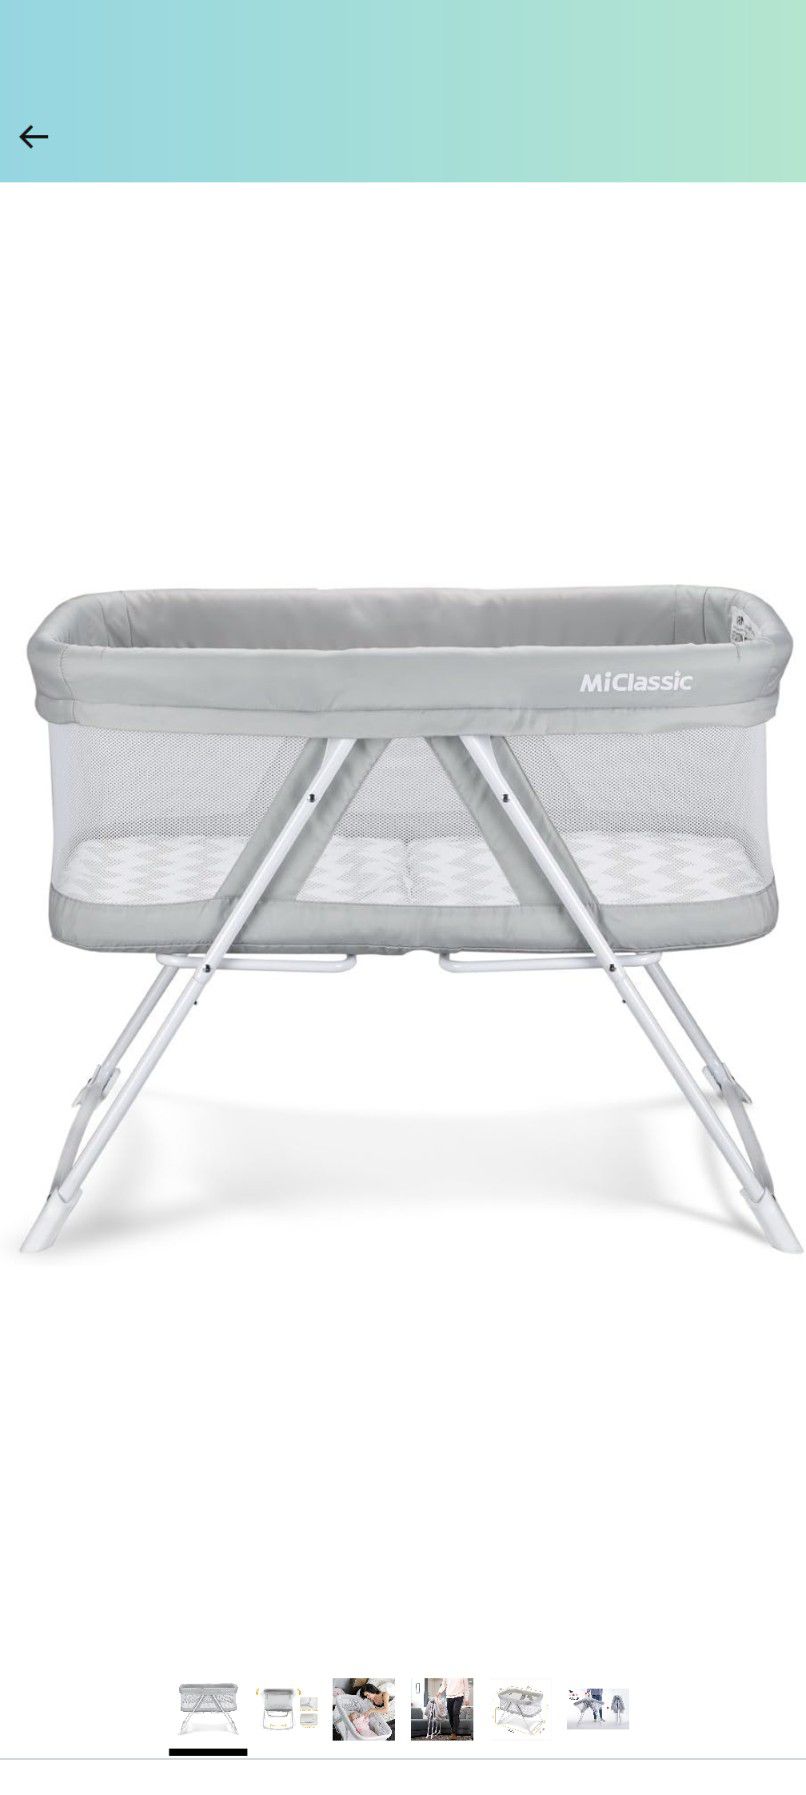  2 In 1 Stationary&Rock Mode Bassinet One-Second Fold Travel Crib Portable Newborn Baby,Gray

